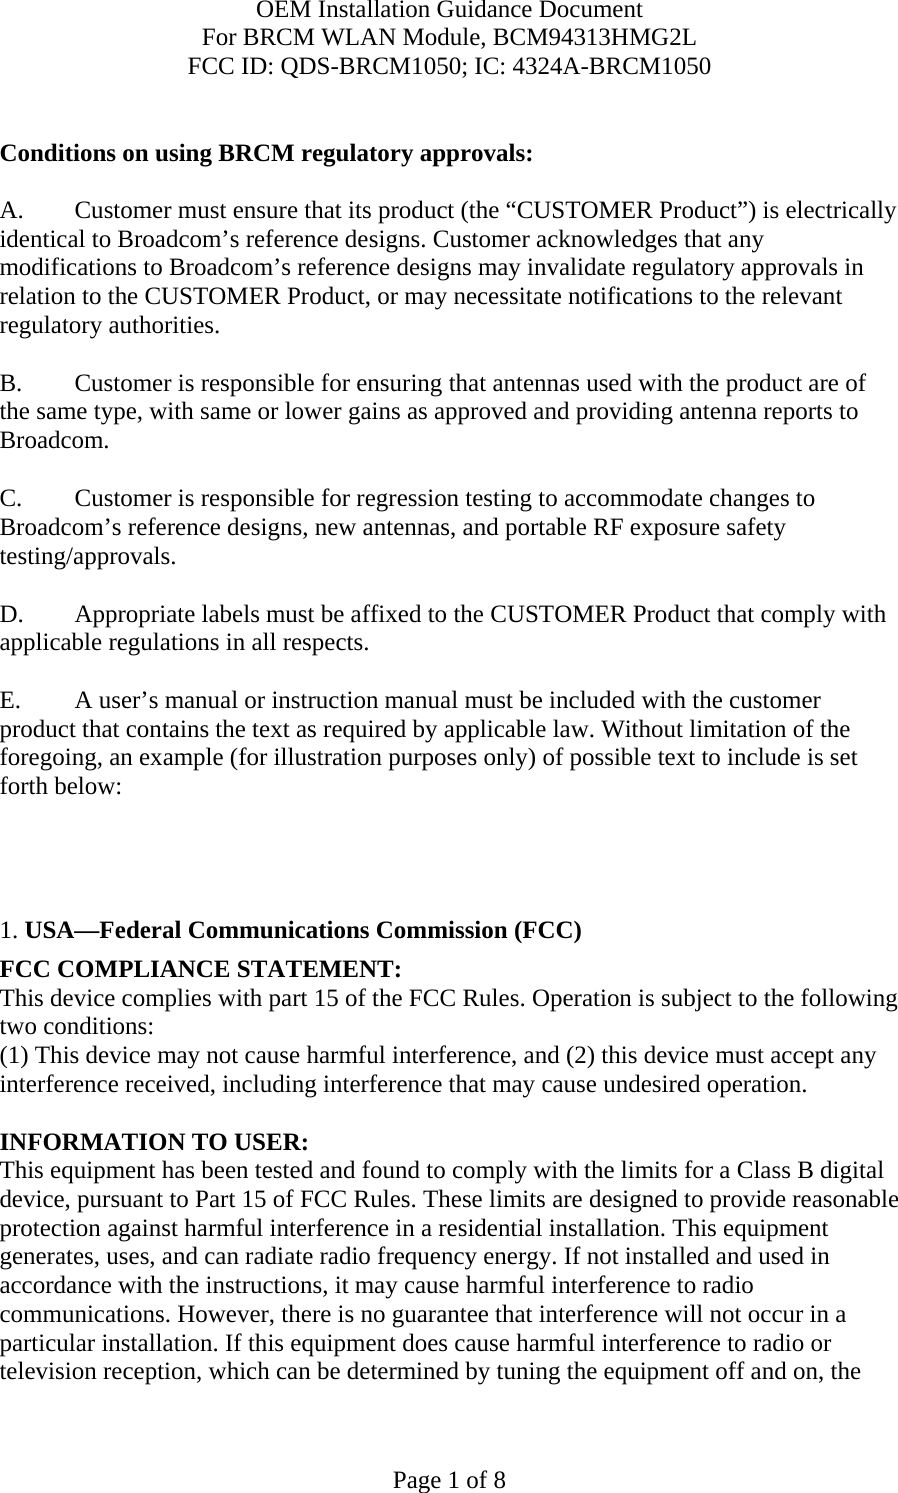 OEM Installation Guidance Document For BRCM WLAN Module, BCM94313HMG2L FCC ID: QDS-BRCM1050; IC: 4324A-BRCM1050  Page 1 of 8  Conditions on using BRCM regulatory approvals:   A.  Customer must ensure that its product (the “CUSTOMER Product”) is electrically identical to Broadcom’s reference designs. Customer acknowledges that any modifications to Broadcom’s reference designs may invalidate regulatory approvals in relation to the CUSTOMER Product, or may necessitate notifications to the relevant regulatory authorities.  B.   Customer is responsible for ensuring that antennas used with the product are of the same type, with same or lower gains as approved and providing antenna reports to Broadcom.  C.   Customer is responsible for regression testing to accommodate changes to Broadcom’s reference designs, new antennas, and portable RF exposure safety testing/approvals.  D.  Appropriate labels must be affixed to the CUSTOMER Product that comply with applicable regulations in all respects.    E.  A user’s manual or instruction manual must be included with the customer product that contains the text as required by applicable law. Without limitation of the foregoing, an example (for illustration purposes only) of possible text to include is set forth below:       1. USA—Federal Communications Commission (FCC) FCC COMPLIANCE STATEMENT: This device complies with part 15 of the FCC Rules. Operation is subject to the following two conditions: (1) This device may not cause harmful interference, and (2) this device must accept any interference received, including interference that may cause undesired operation.  INFORMATION TO USER: This equipment has been tested and found to comply with the limits for a Class B digital device, pursuant to Part 15 of FCC Rules. These limits are designed to provide reasonable protection against harmful interference in a residential installation. This equipment generates, uses, and can radiate radio frequency energy. If not installed and used in accordance with the instructions, it may cause harmful interference to radio communications. However, there is no guarantee that interference will not occur in a particular installation. If this equipment does cause harmful interference to radio or television reception, which can be determined by tuning the equipment off and on, the 